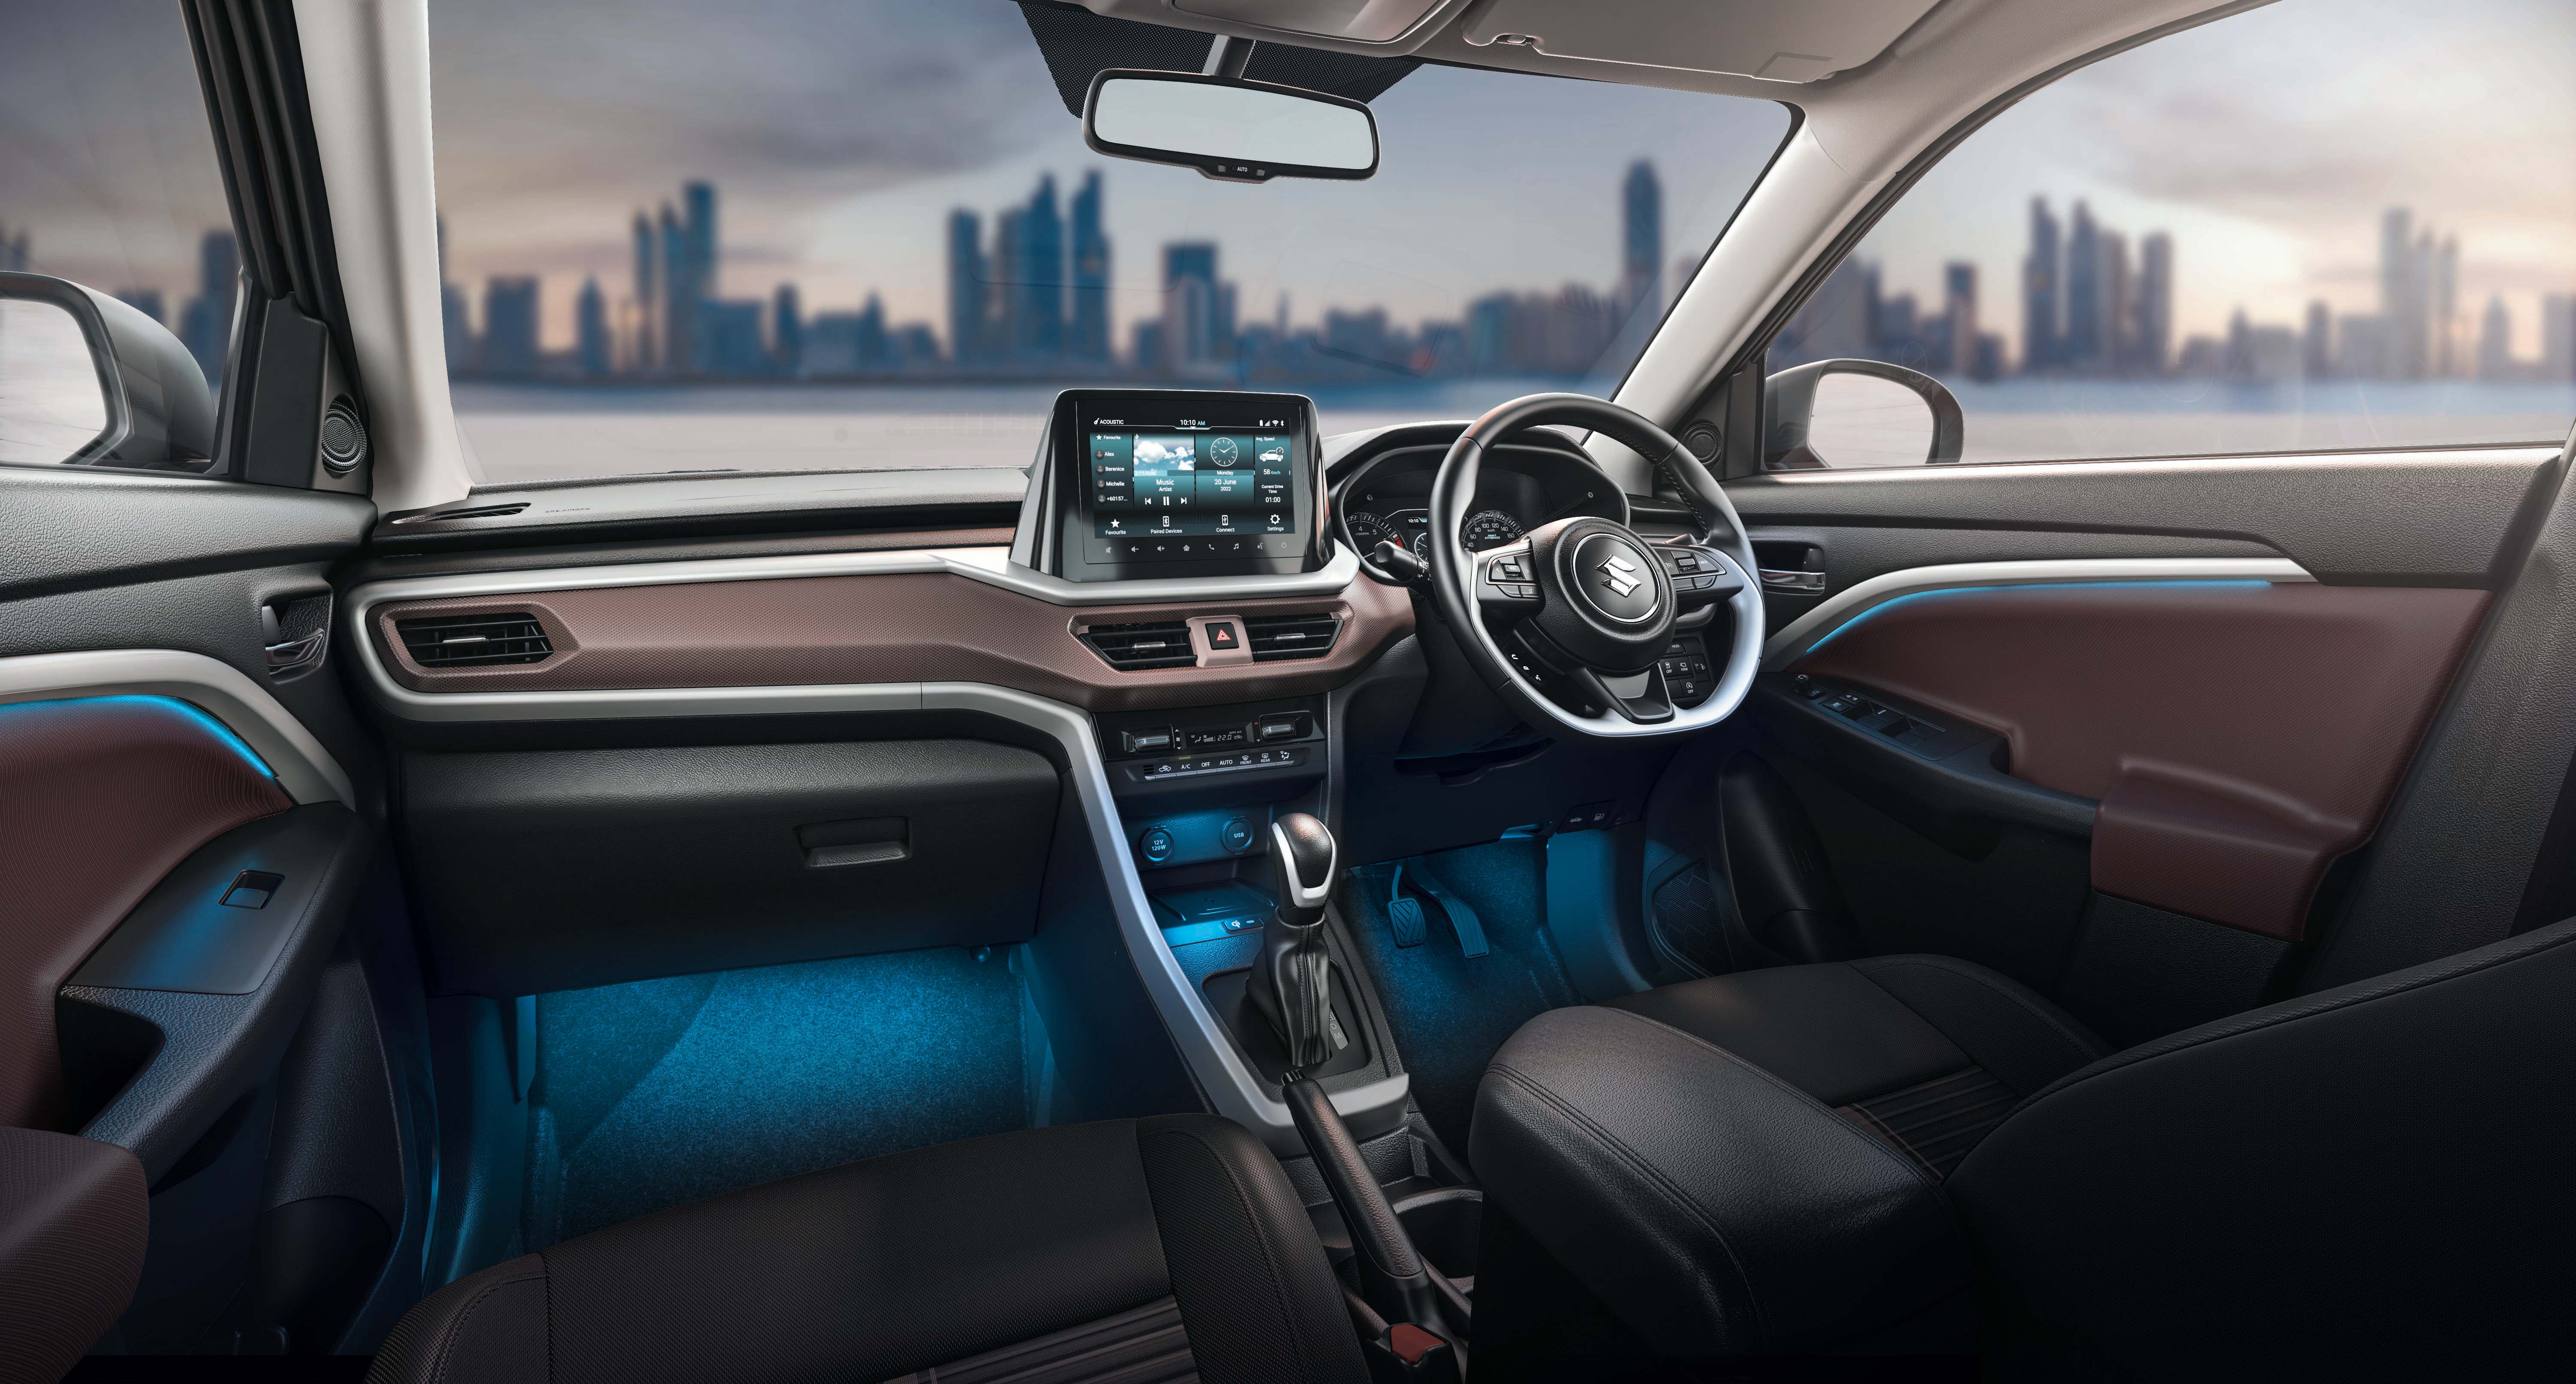 Dual Tone Interiors with Interior Ambient Lightning